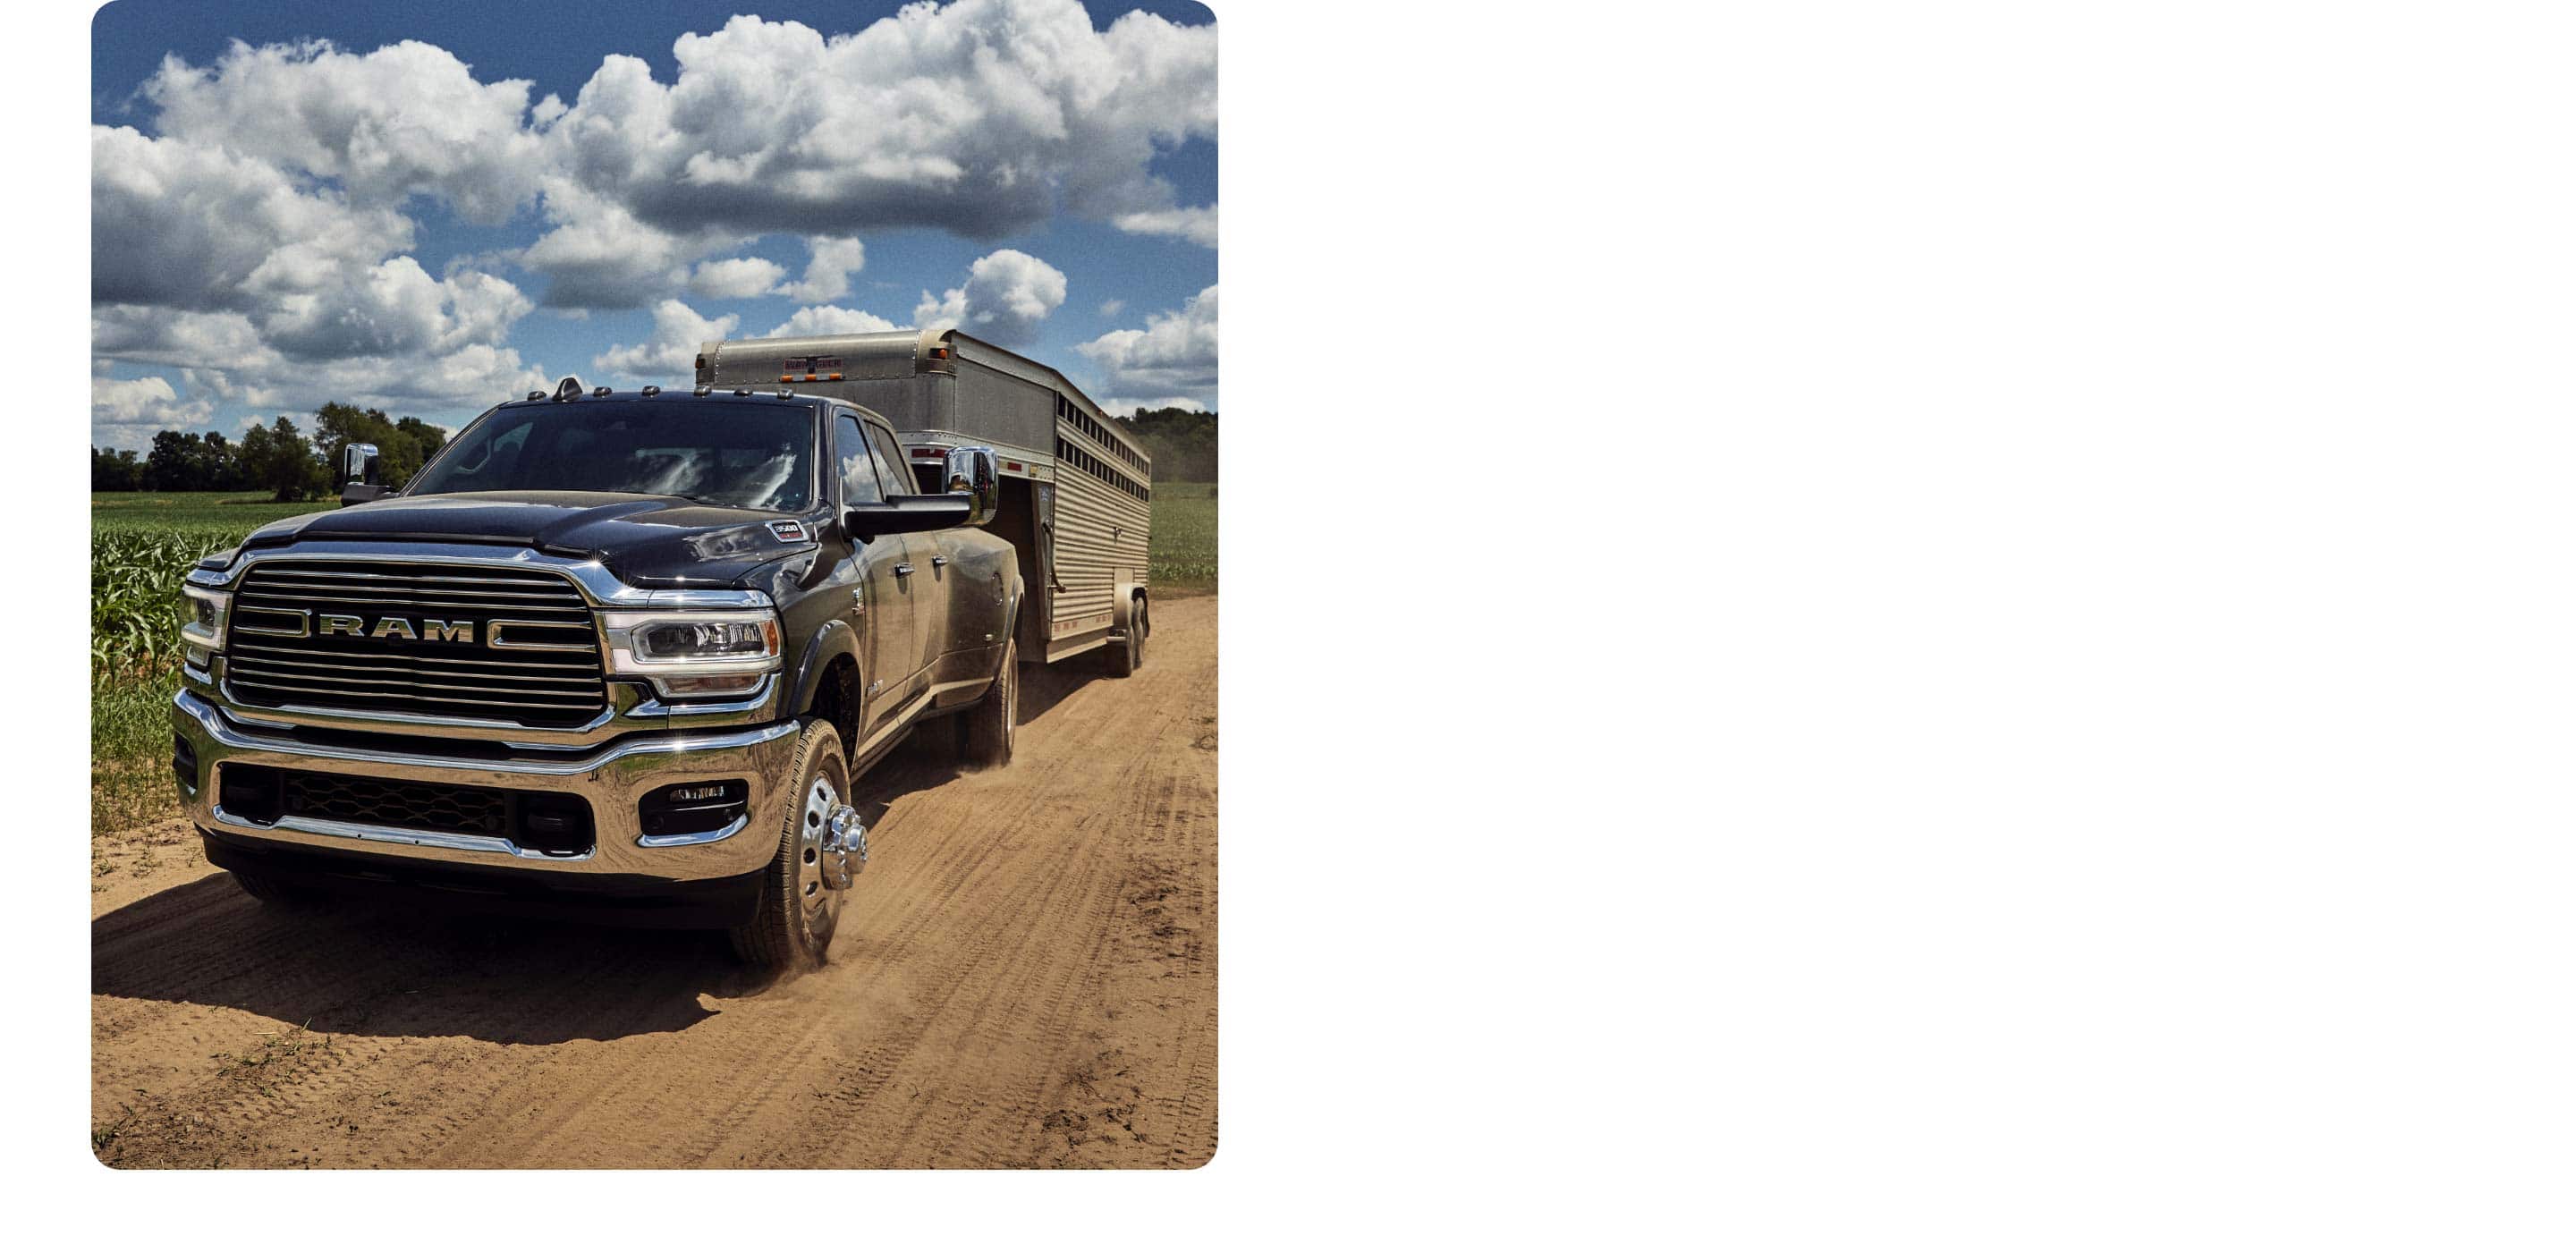 The 2021 Ram 3500 towing a horse trailer.